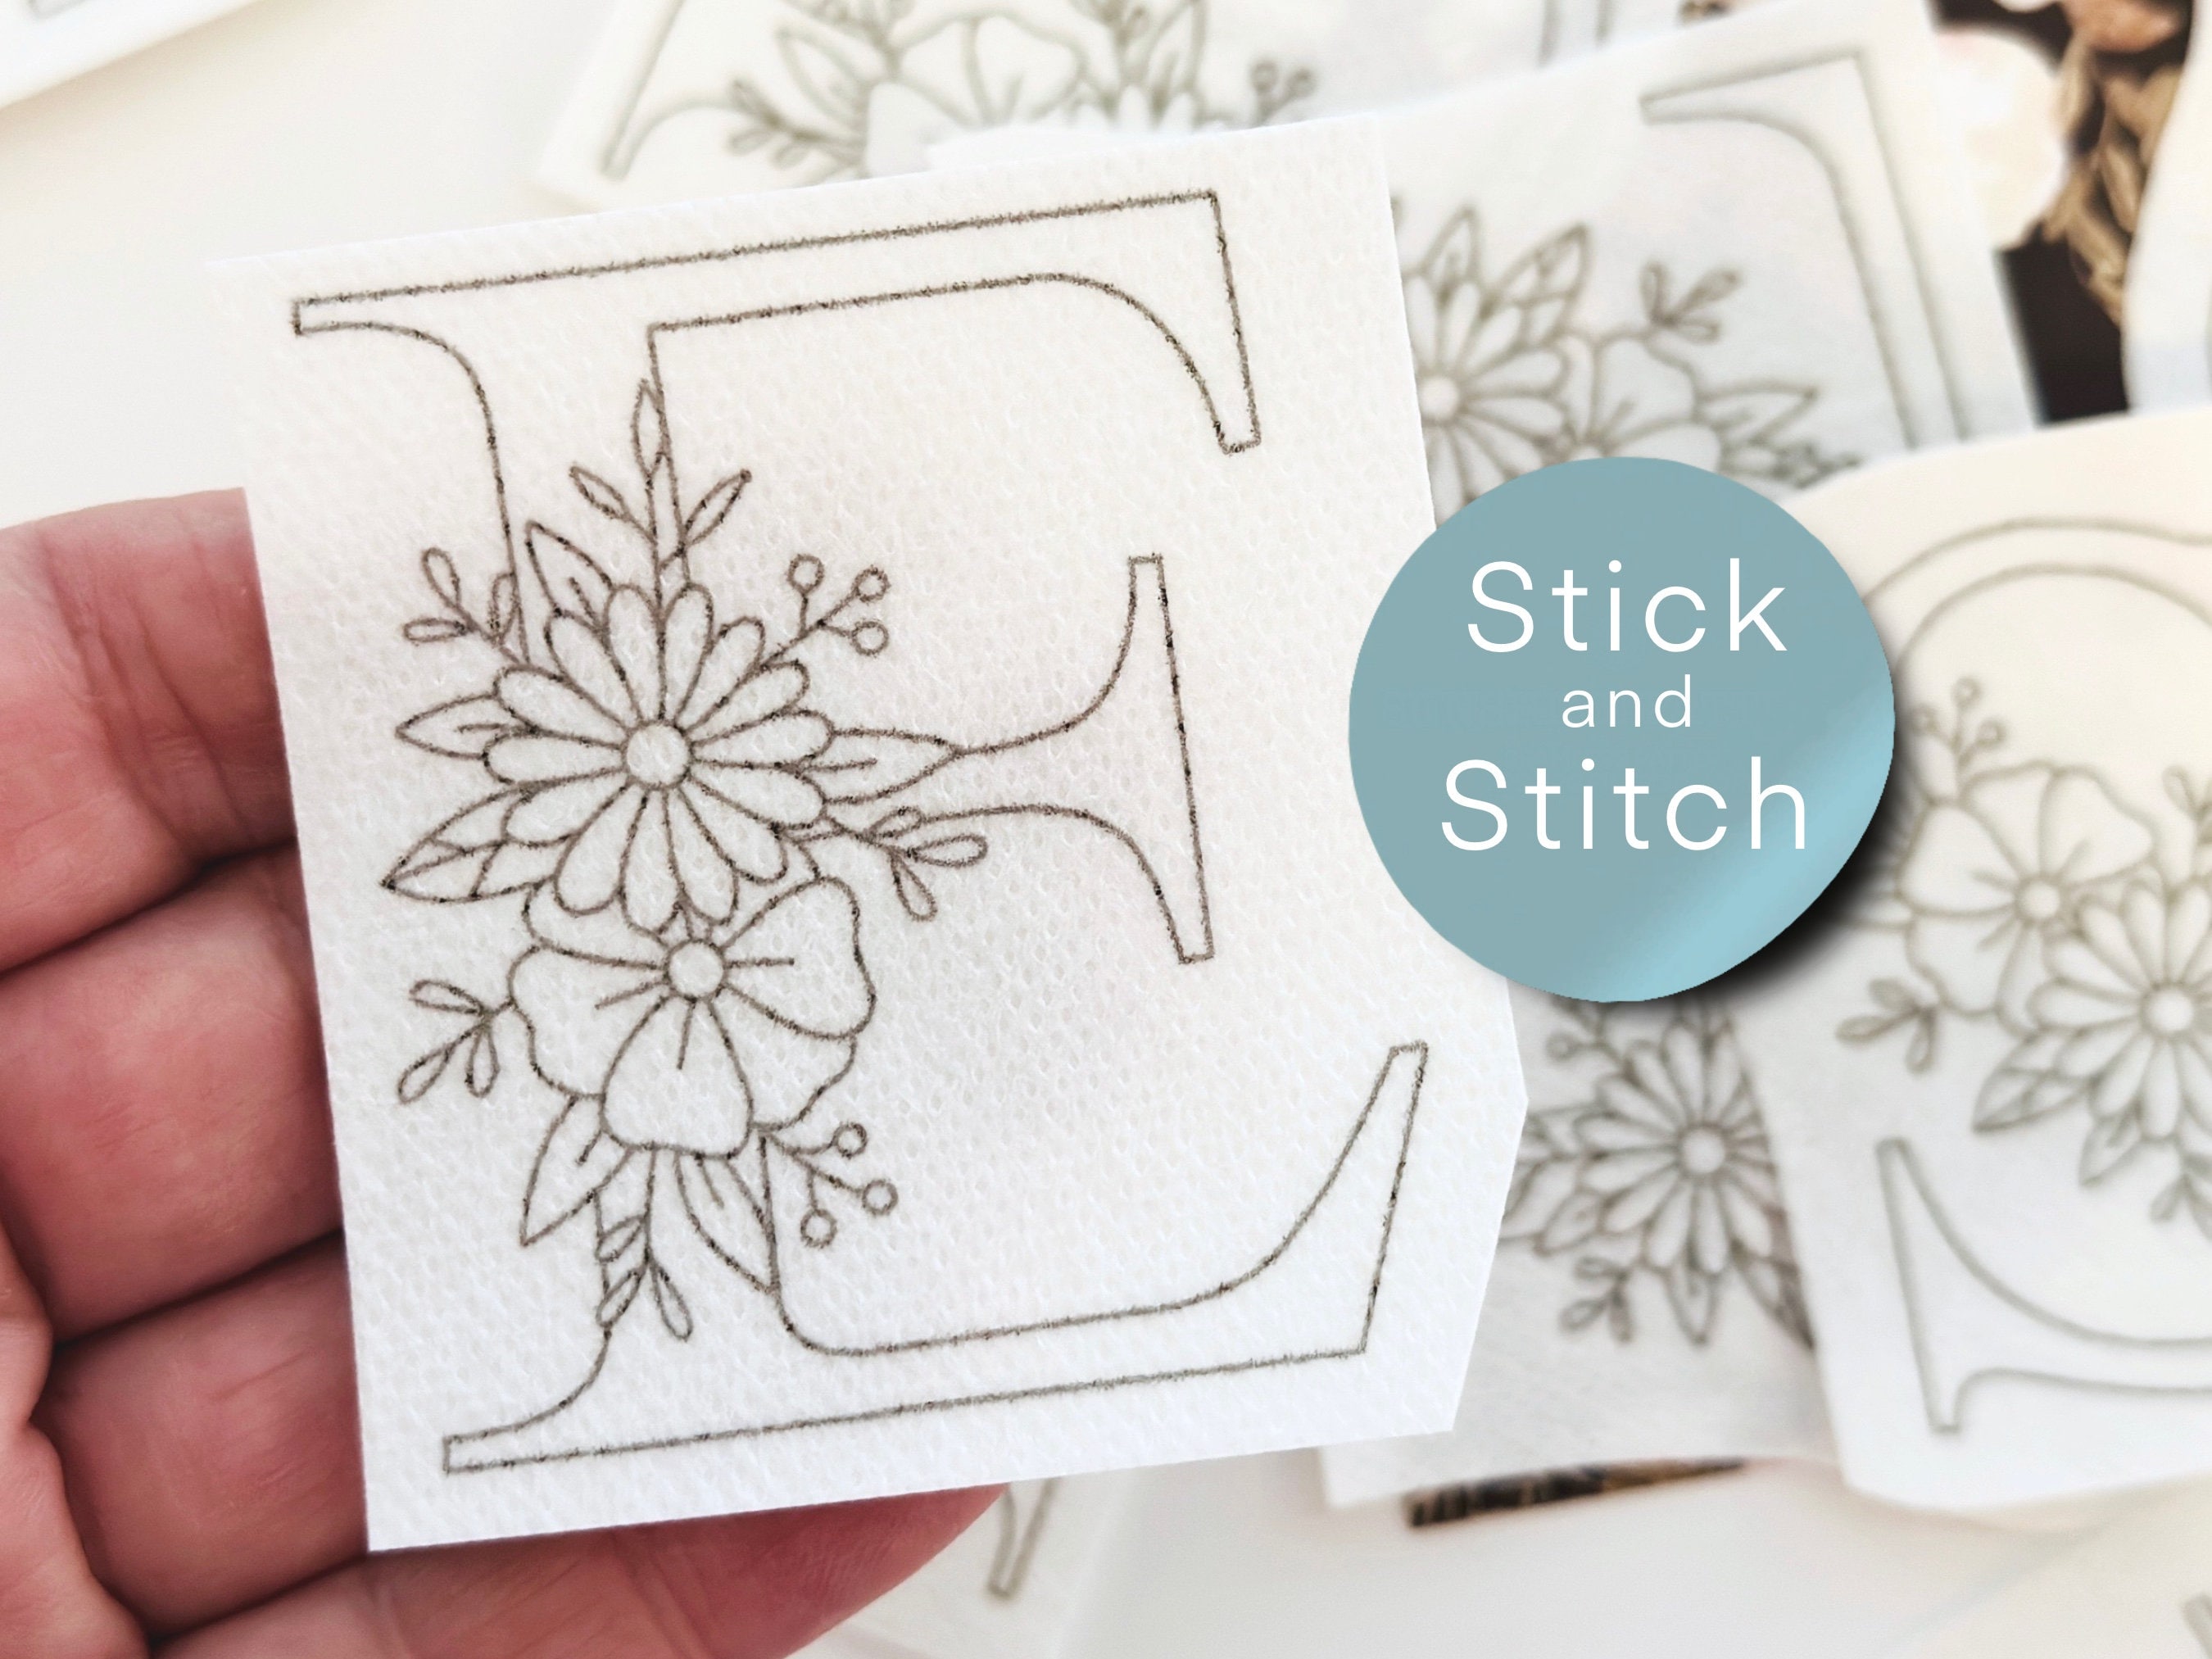 Stick and Stitch Embroidery, Stick and Stitch Patterns, Water Soluble  Embroidery Designs, Wash Away Embroidery Patterns 